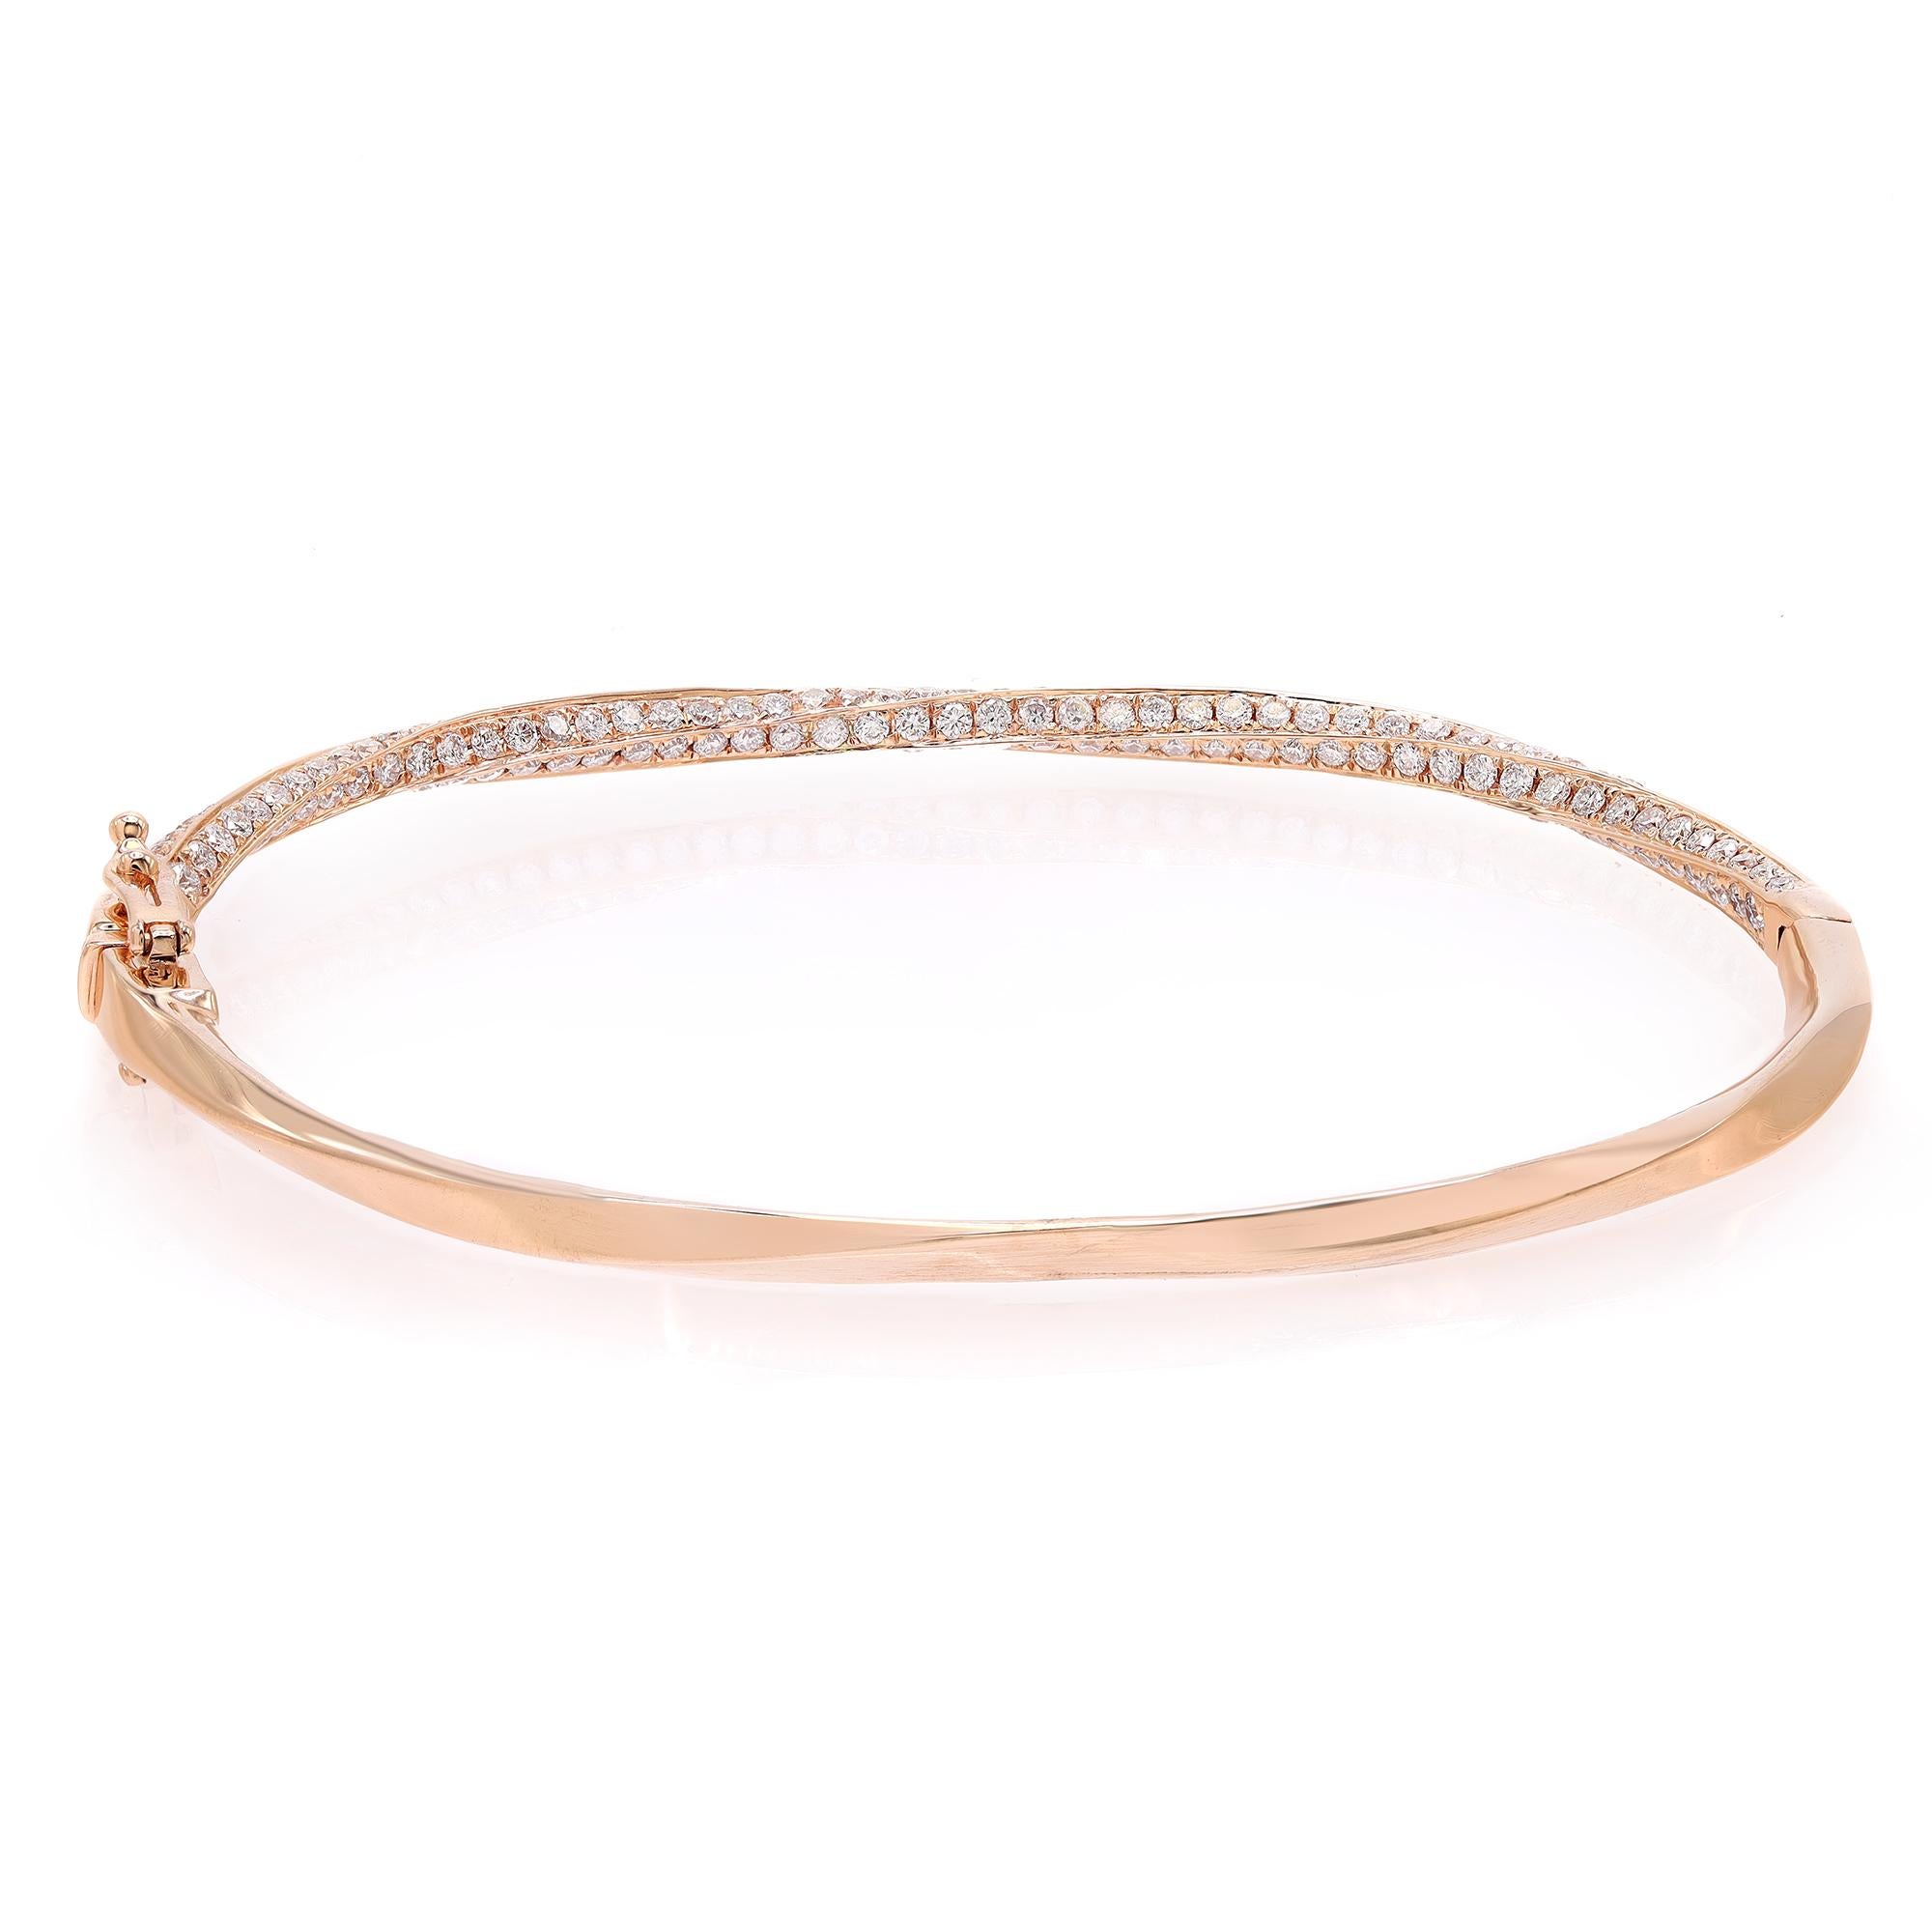 This beautifully crafted bangle bracelet features pave set round brilliant cut diamonds encrusted halfway through the bangle. Crafted in 18k rose gold. Total diamond weight: 2.07 carats. Diamond Quality: F-G color and SI clarity. Wrist size: 6.5